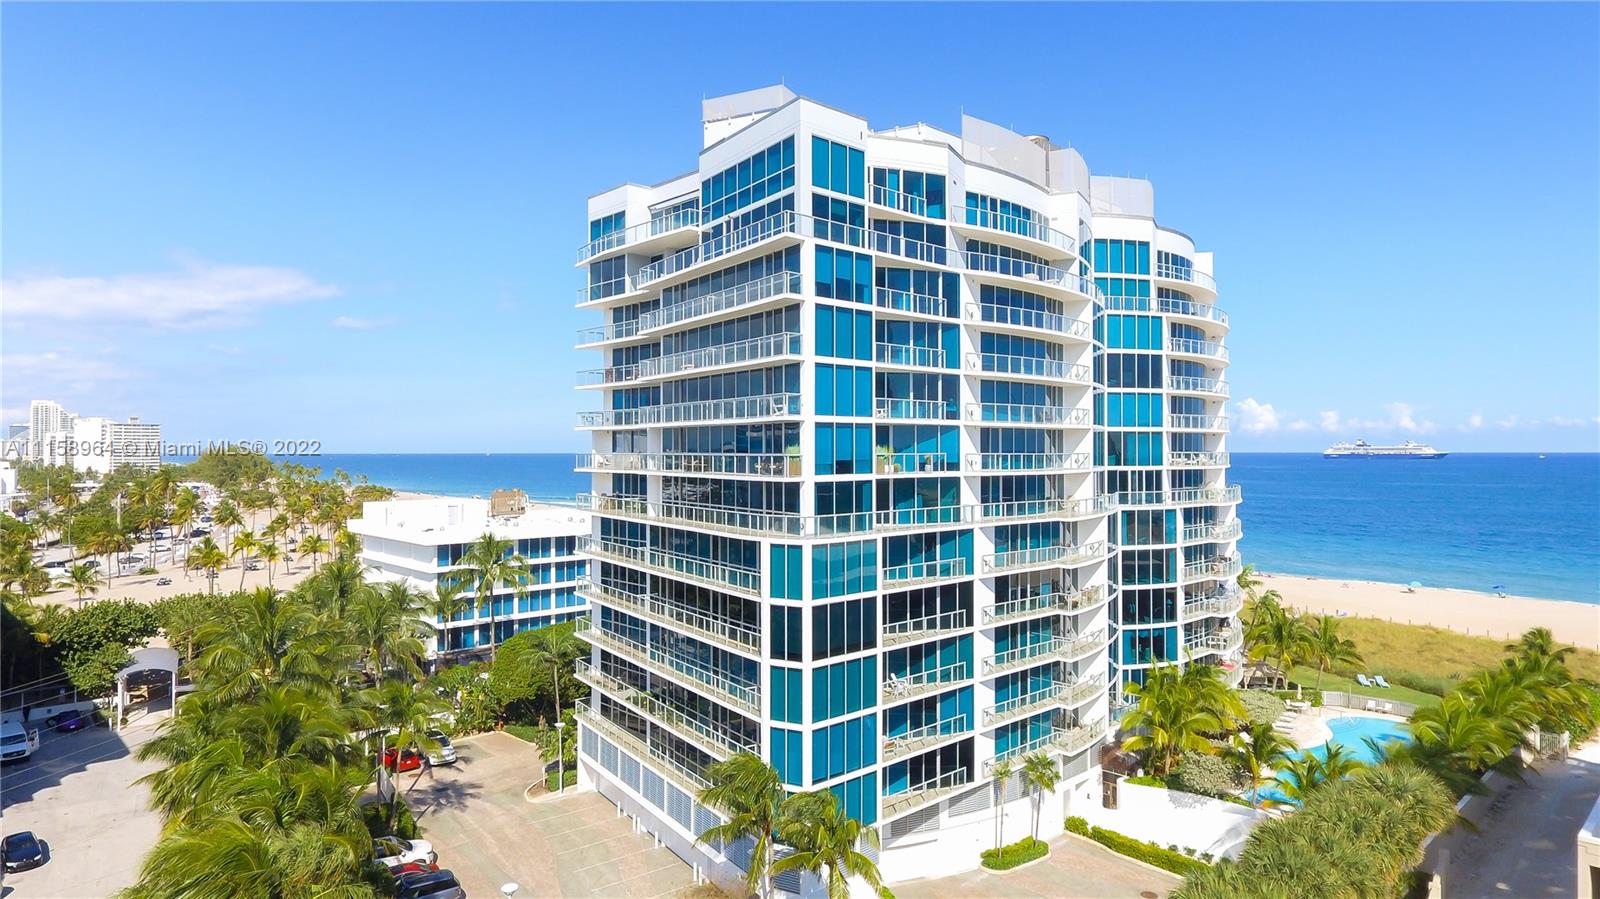 Coconut Grove Residences is located directly on the sand on beautiful and famous Fort Lauderdale Beach. Direct breathtaking ocean views from every room. This condo is built out as a large 1 bedroom allowing for open living space & expansive water views. Floor to ceiling glass & southeast facing large terraces provide stunning views of the ocean, beach & cruise ships. Spacious open kitchen with oversized island. 2 large walk in closets for all your storage needs. CGR is a boutique building right next door to Marriott Harbor Beach Resort & Spa where you can purchase a social membership if you wish includes: spa & tennis. Gorgeous sunlit pool, fitness room, social room, secured gated property & valet all on the sunkissed beach in prestigious Harbor Beach. Mins to Las Olas Blvd and the airport